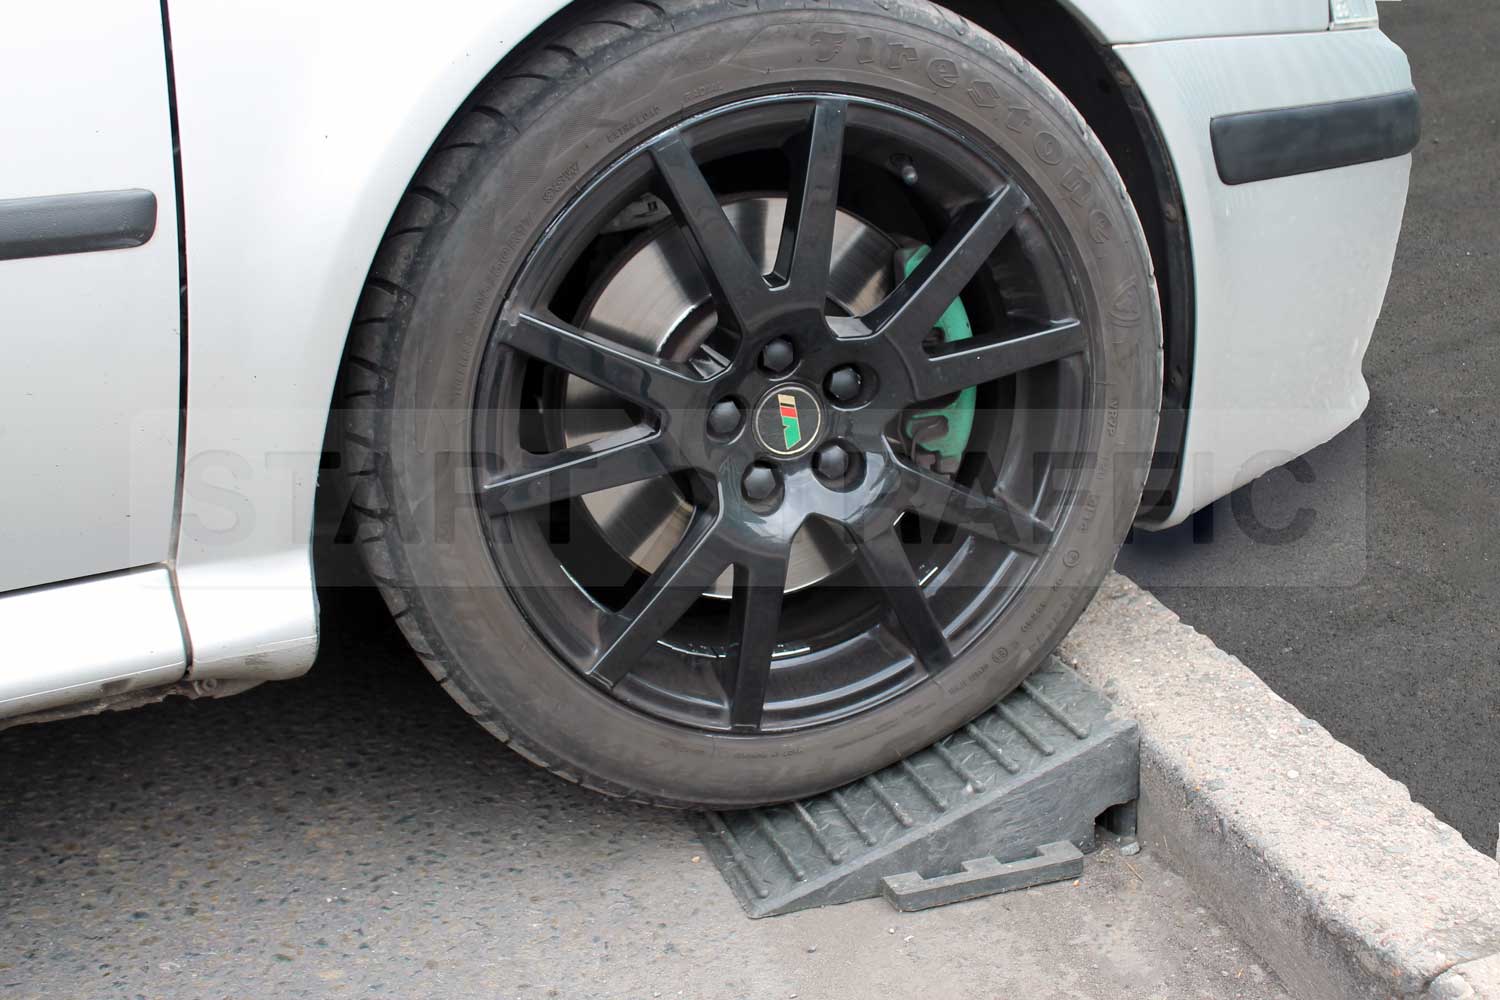 Kerb Wedge being used with car